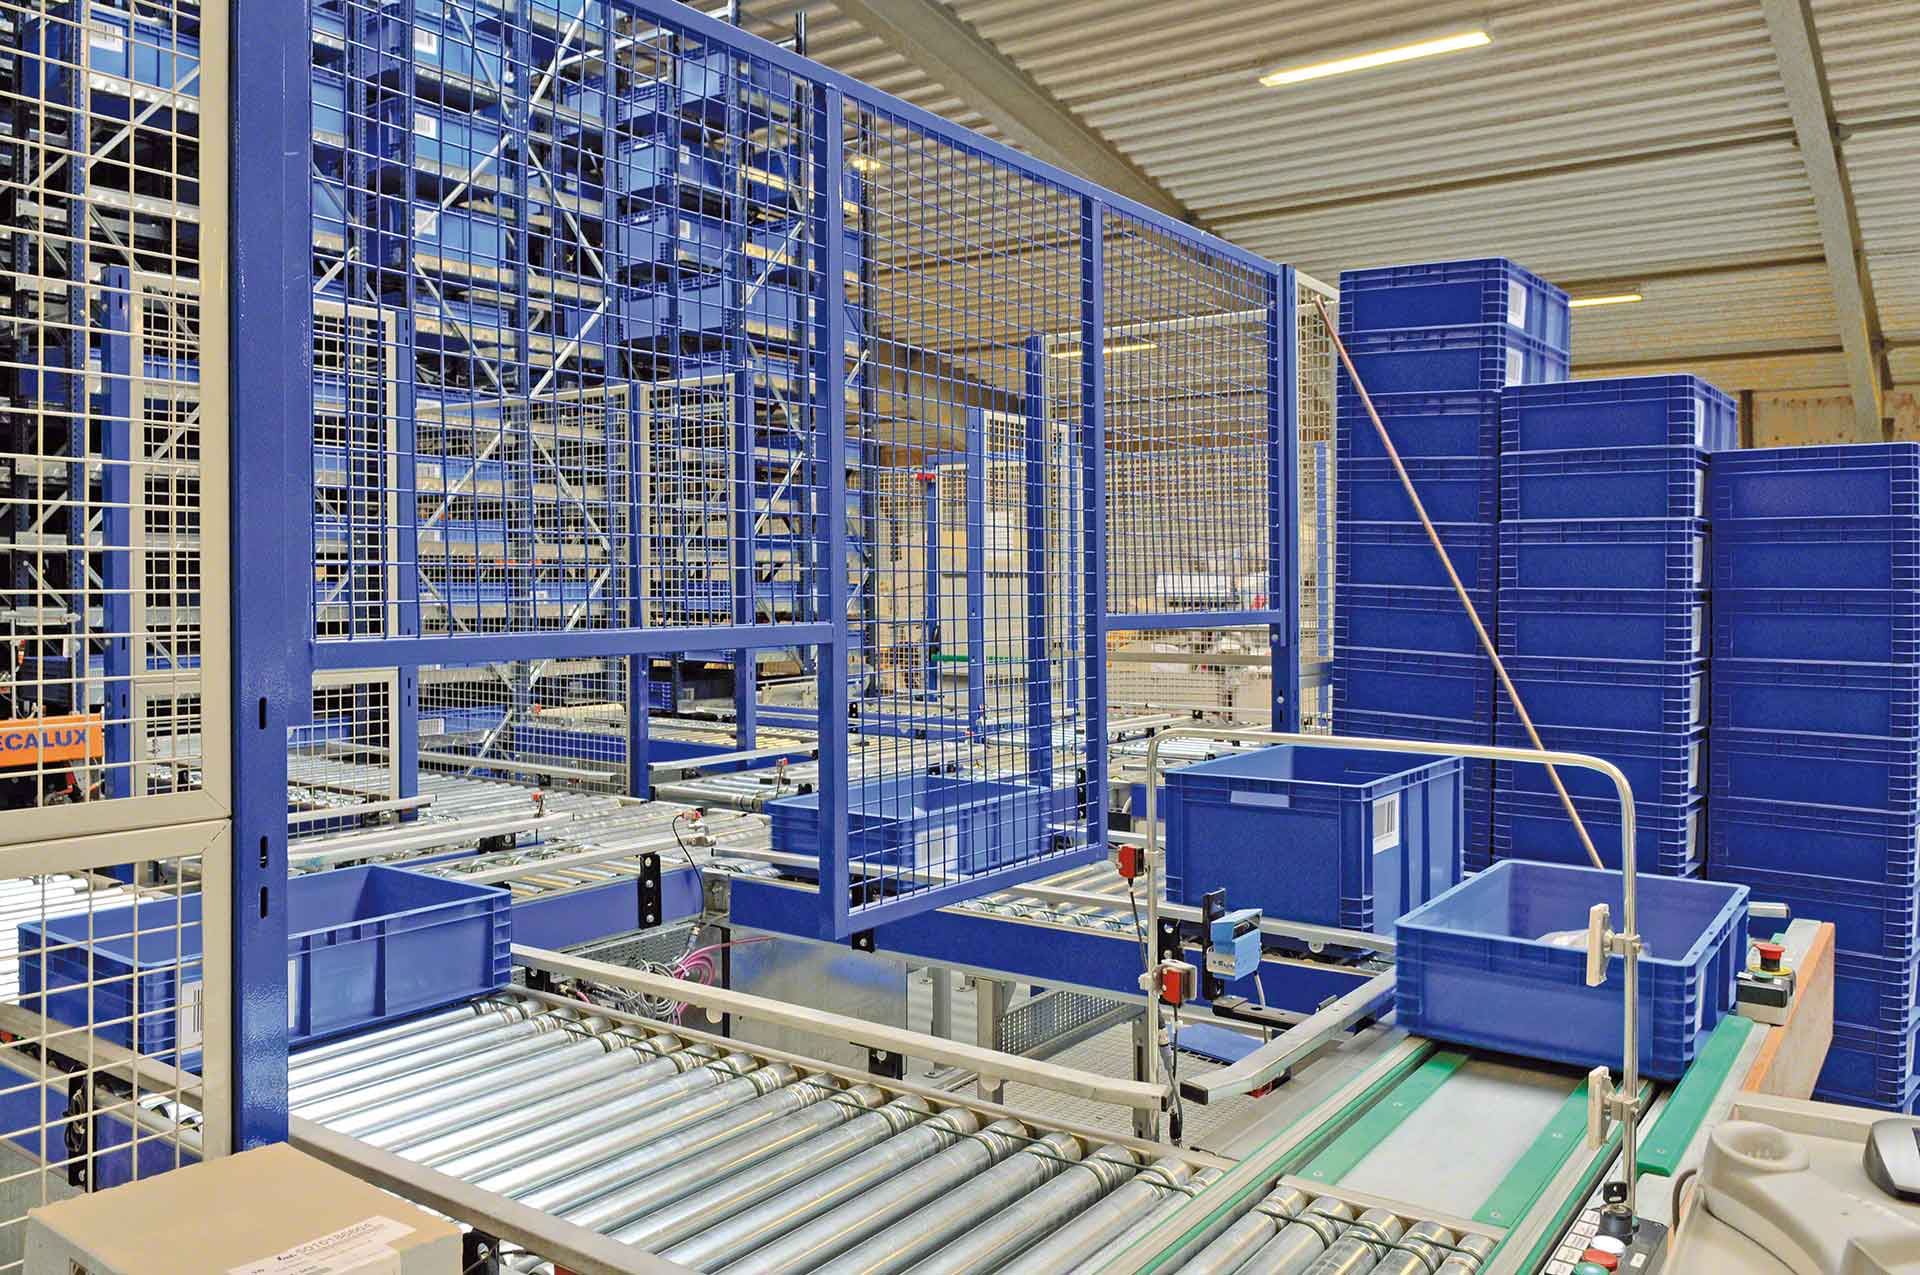 Goods movements in a warehouse is an aspect that can be optimized by implementing AI in logistics